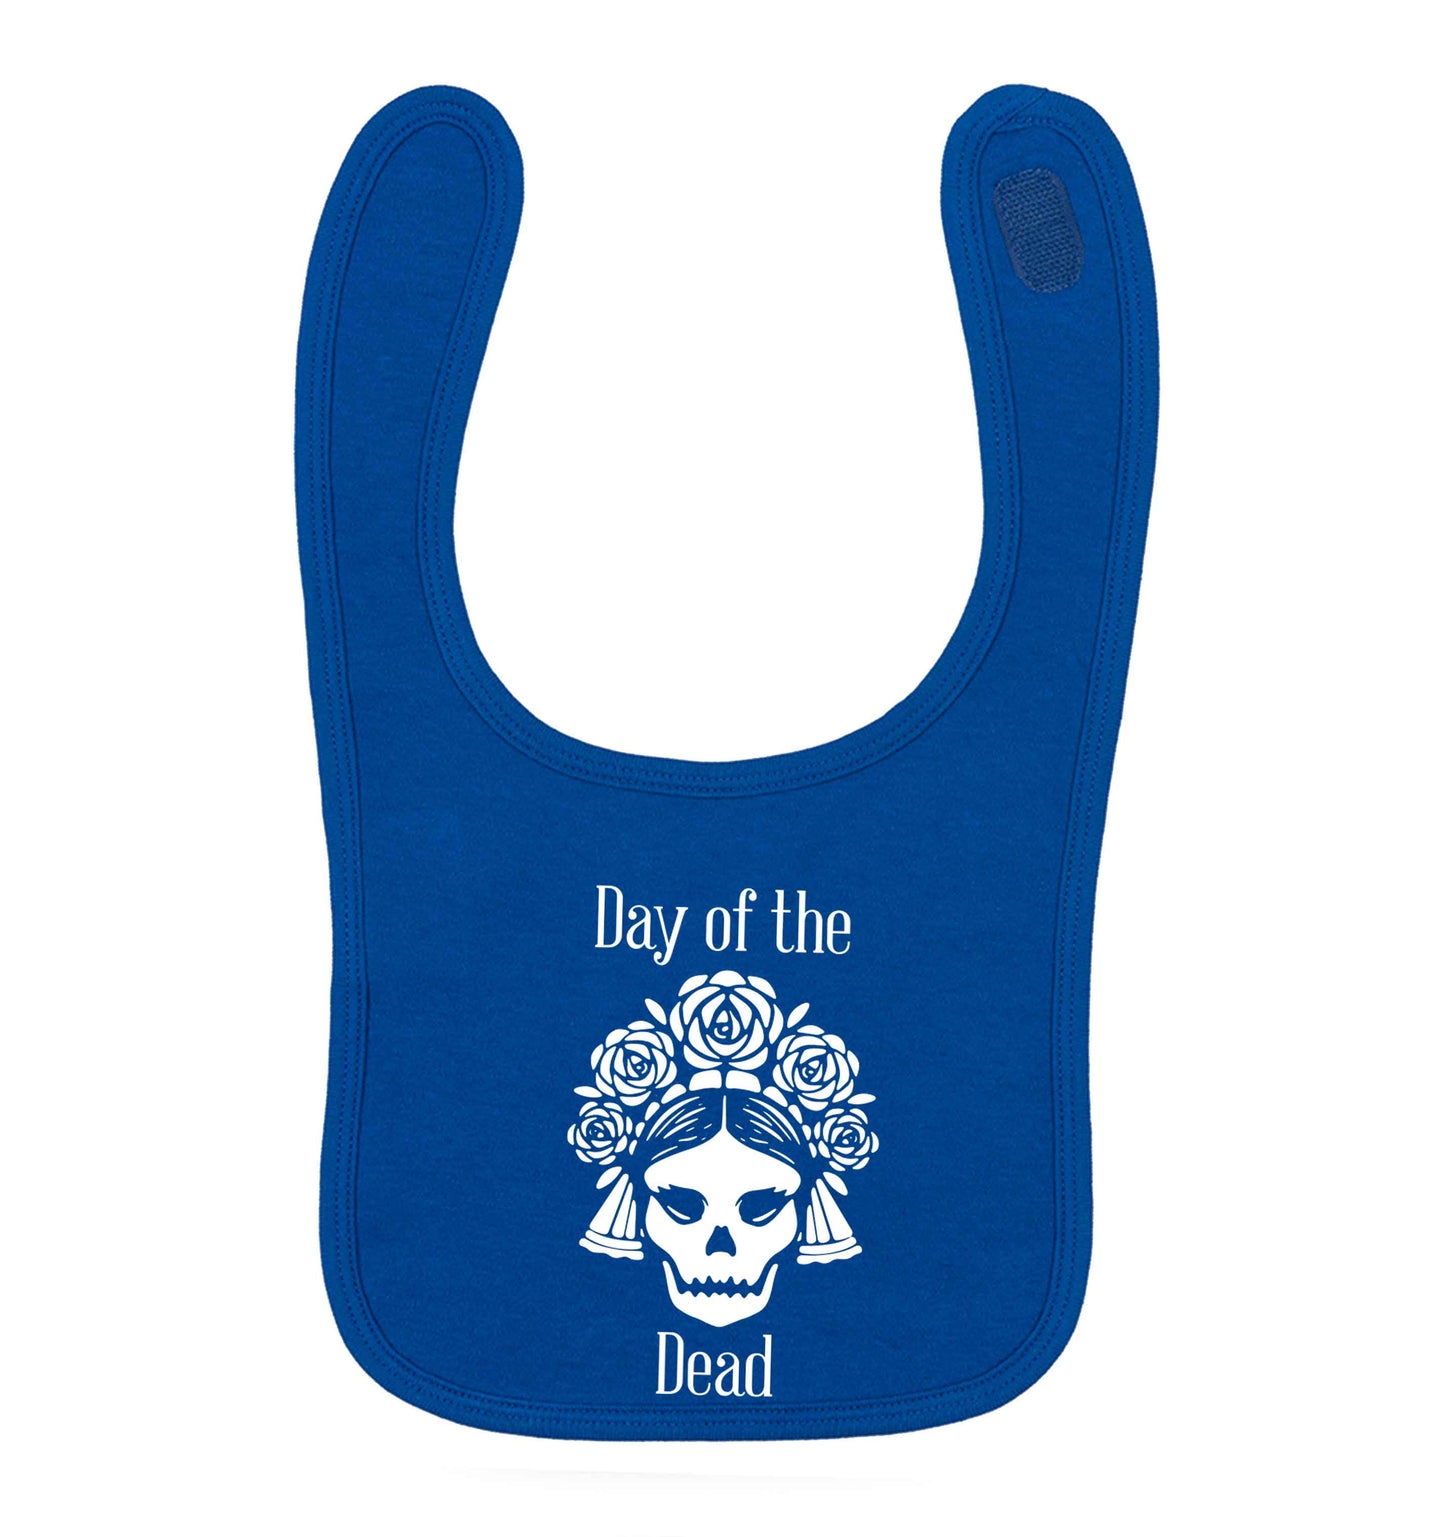 Day of the dead royal blue baby bib